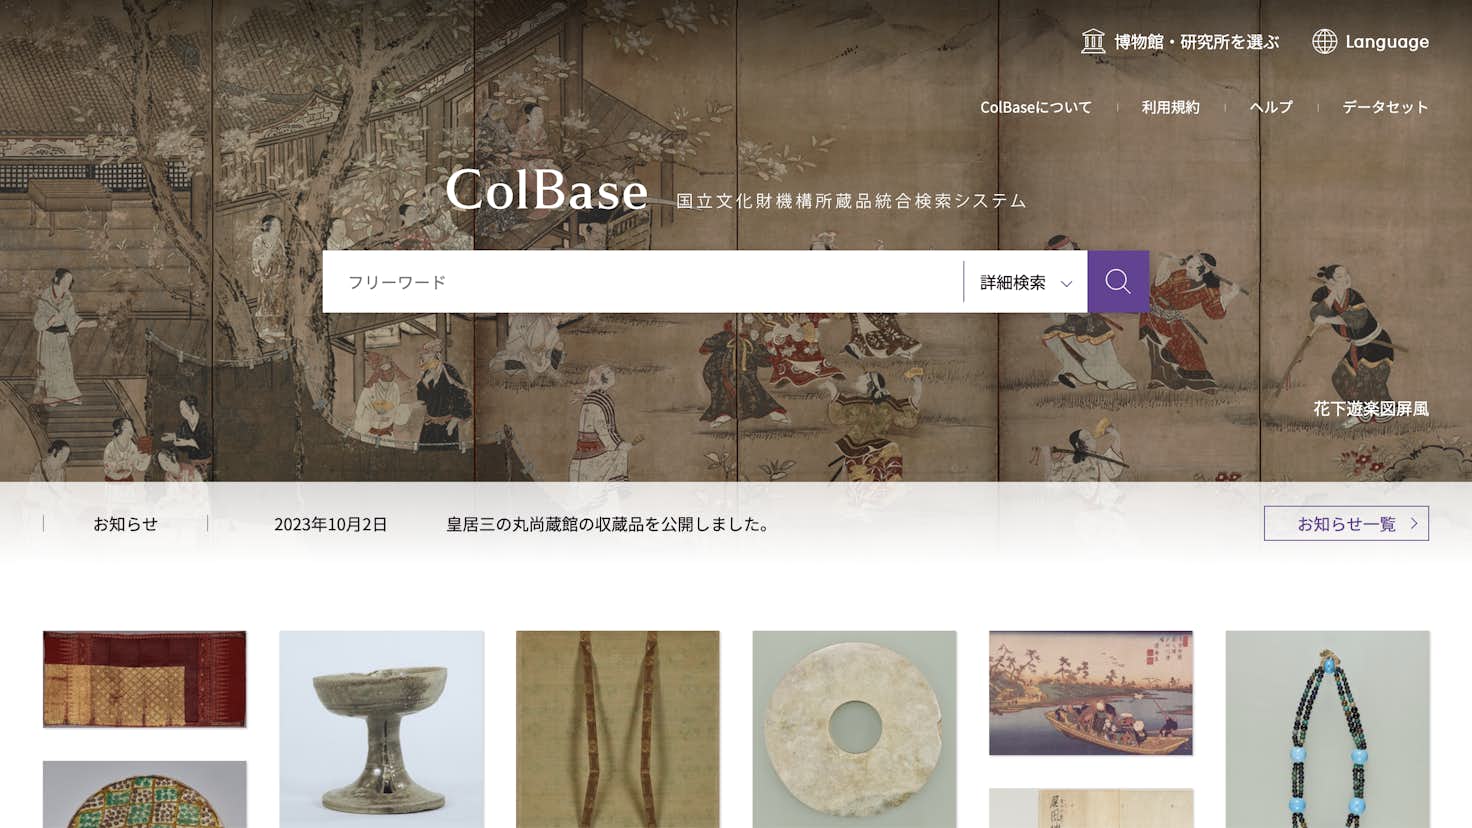 ColBase